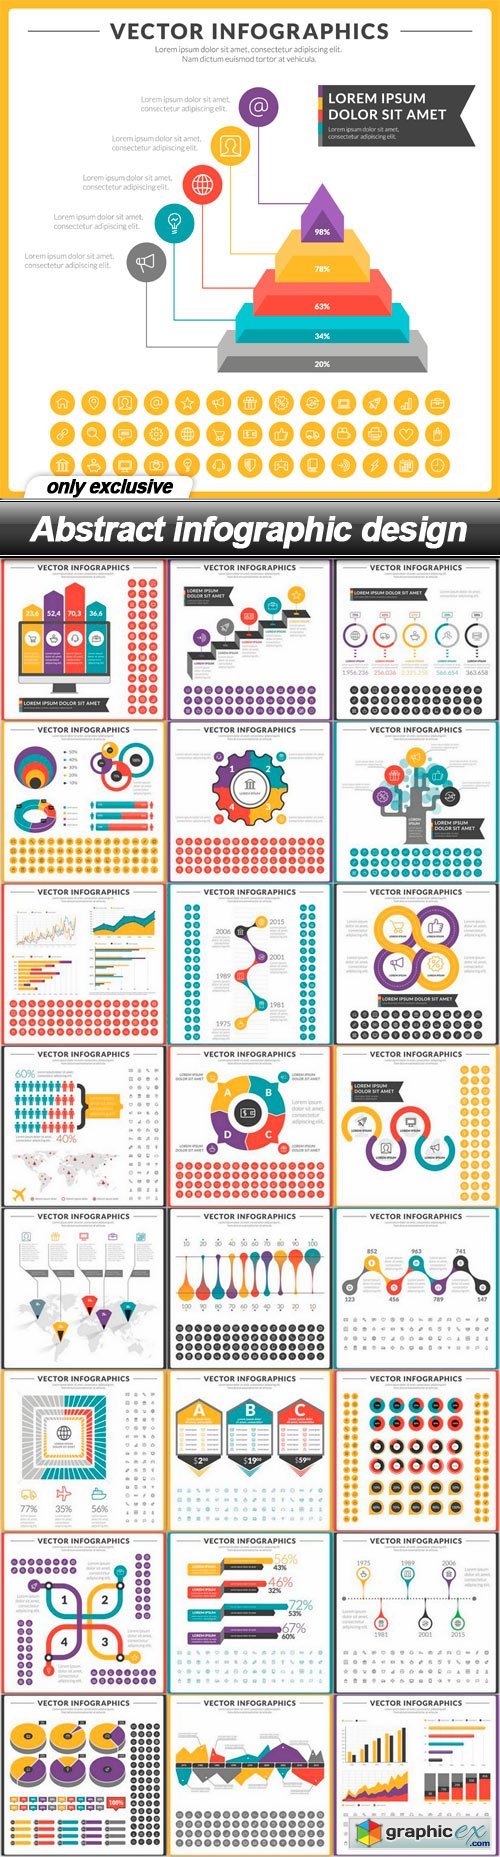 Abstract infographic design - 25 EPS